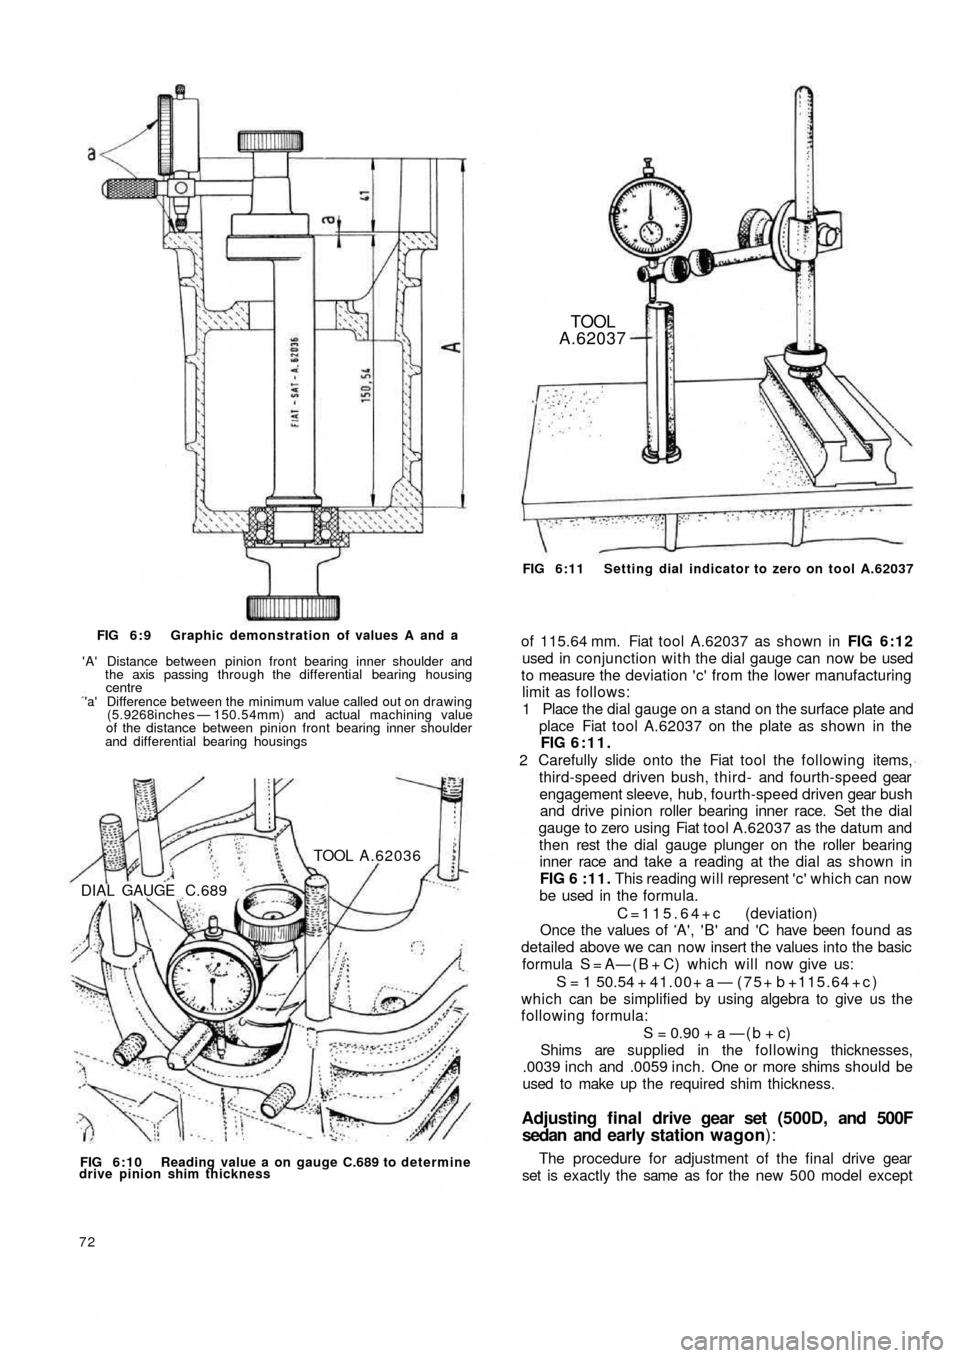 FIAT 500 1957 1.G Workshop Manual FIG 6:9  Graphic demonstration of values A and a
A Distance between pinion front bearing inner shoulder and
the axis passing through the differential bearing housing
centrea Difference between the